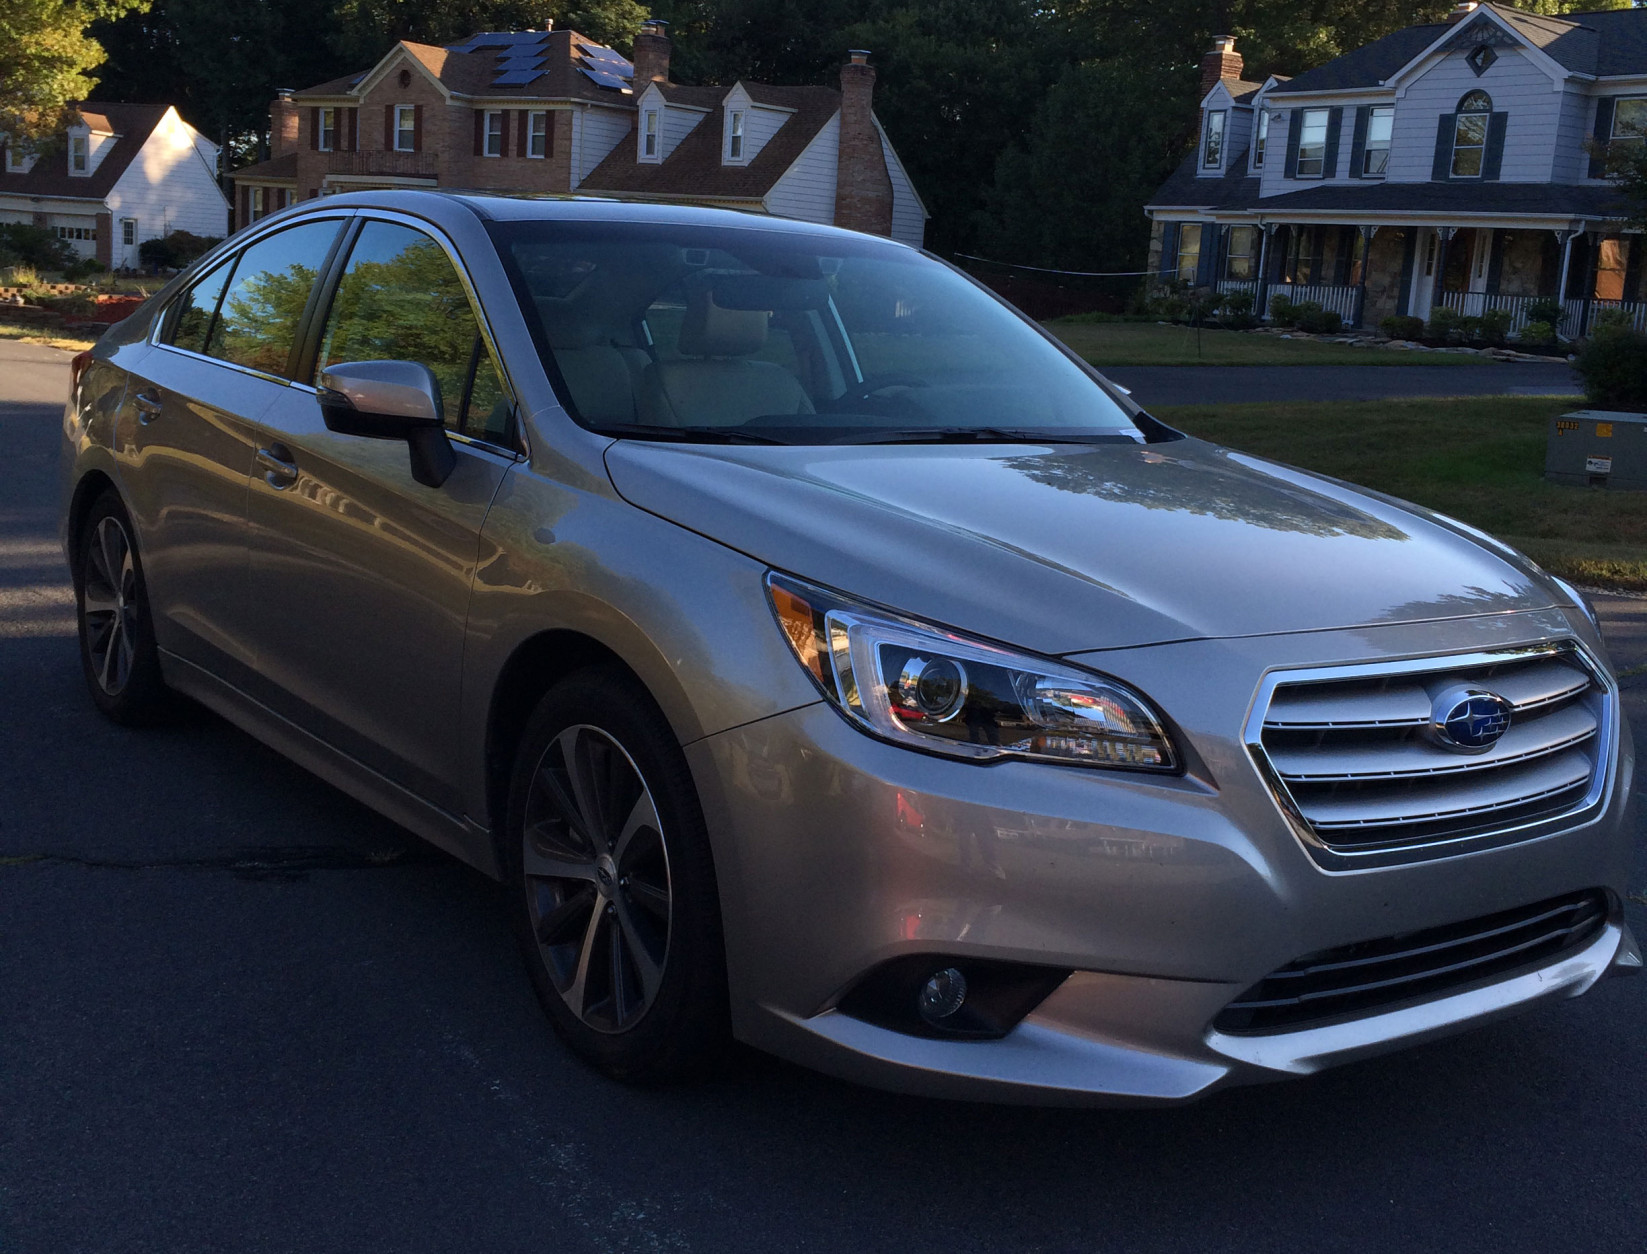 The exterior of the Subaru Legacy 3.6R Limited won't wow you, but it’s a handsome design. (WTOP/Mike Parris)